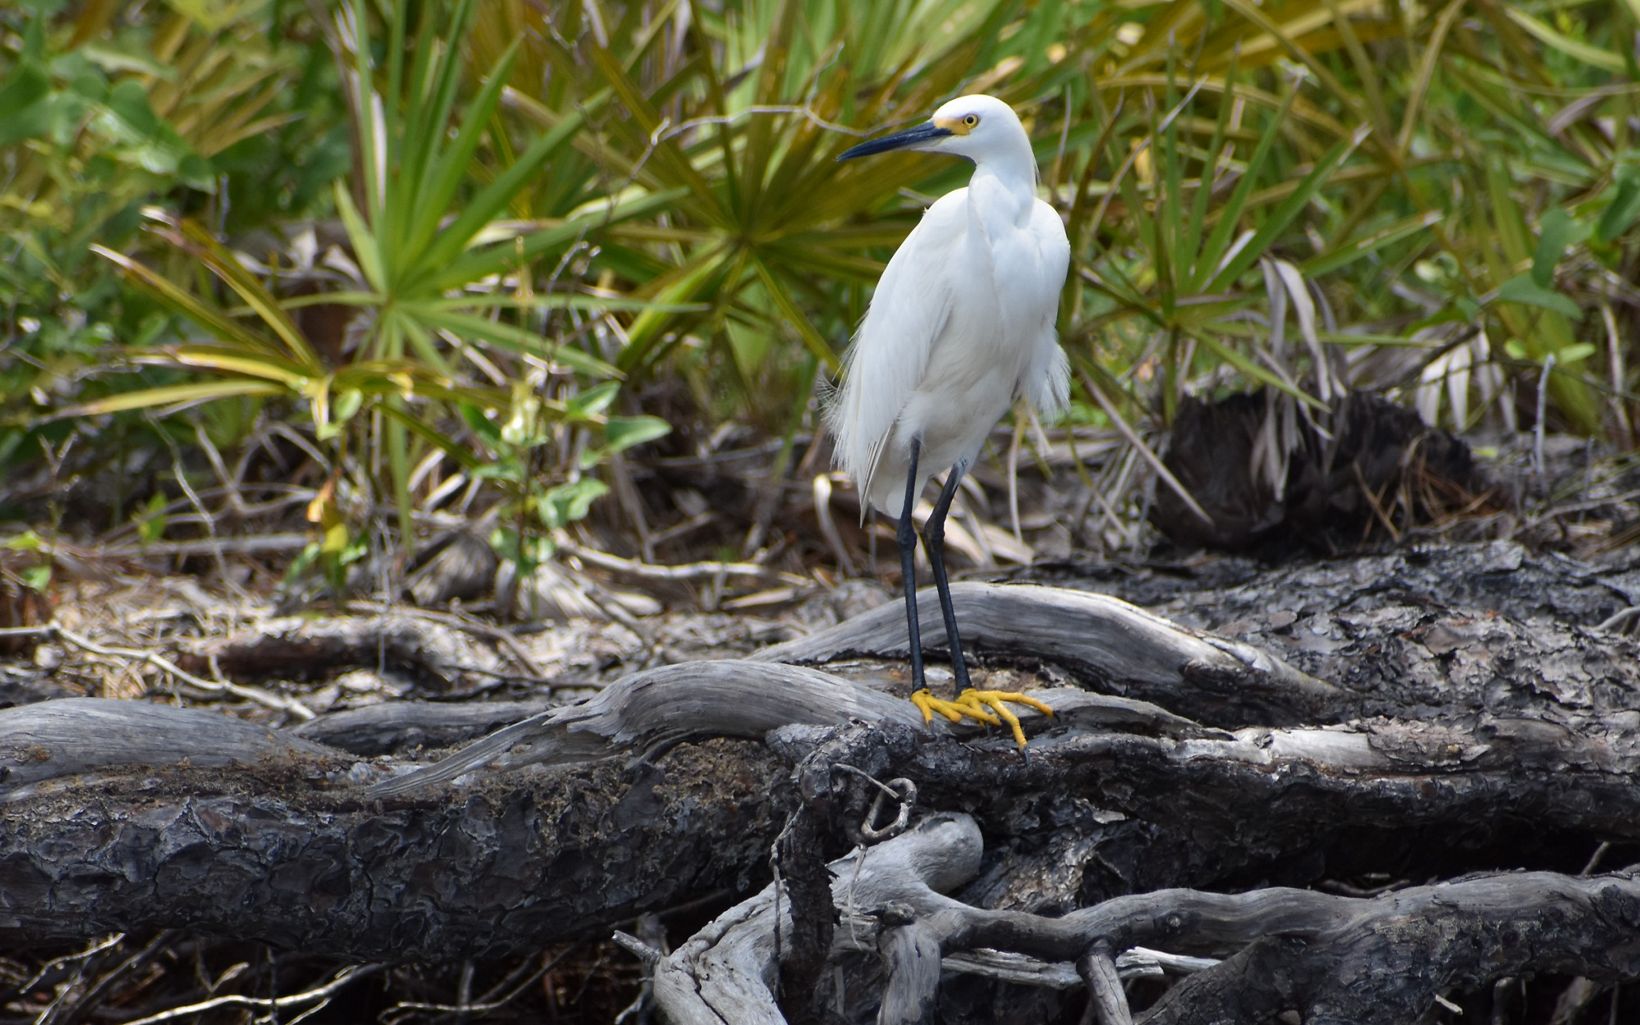 A snowy egret stands in the shade on tree roots along the shoreline while looking out over the bay.